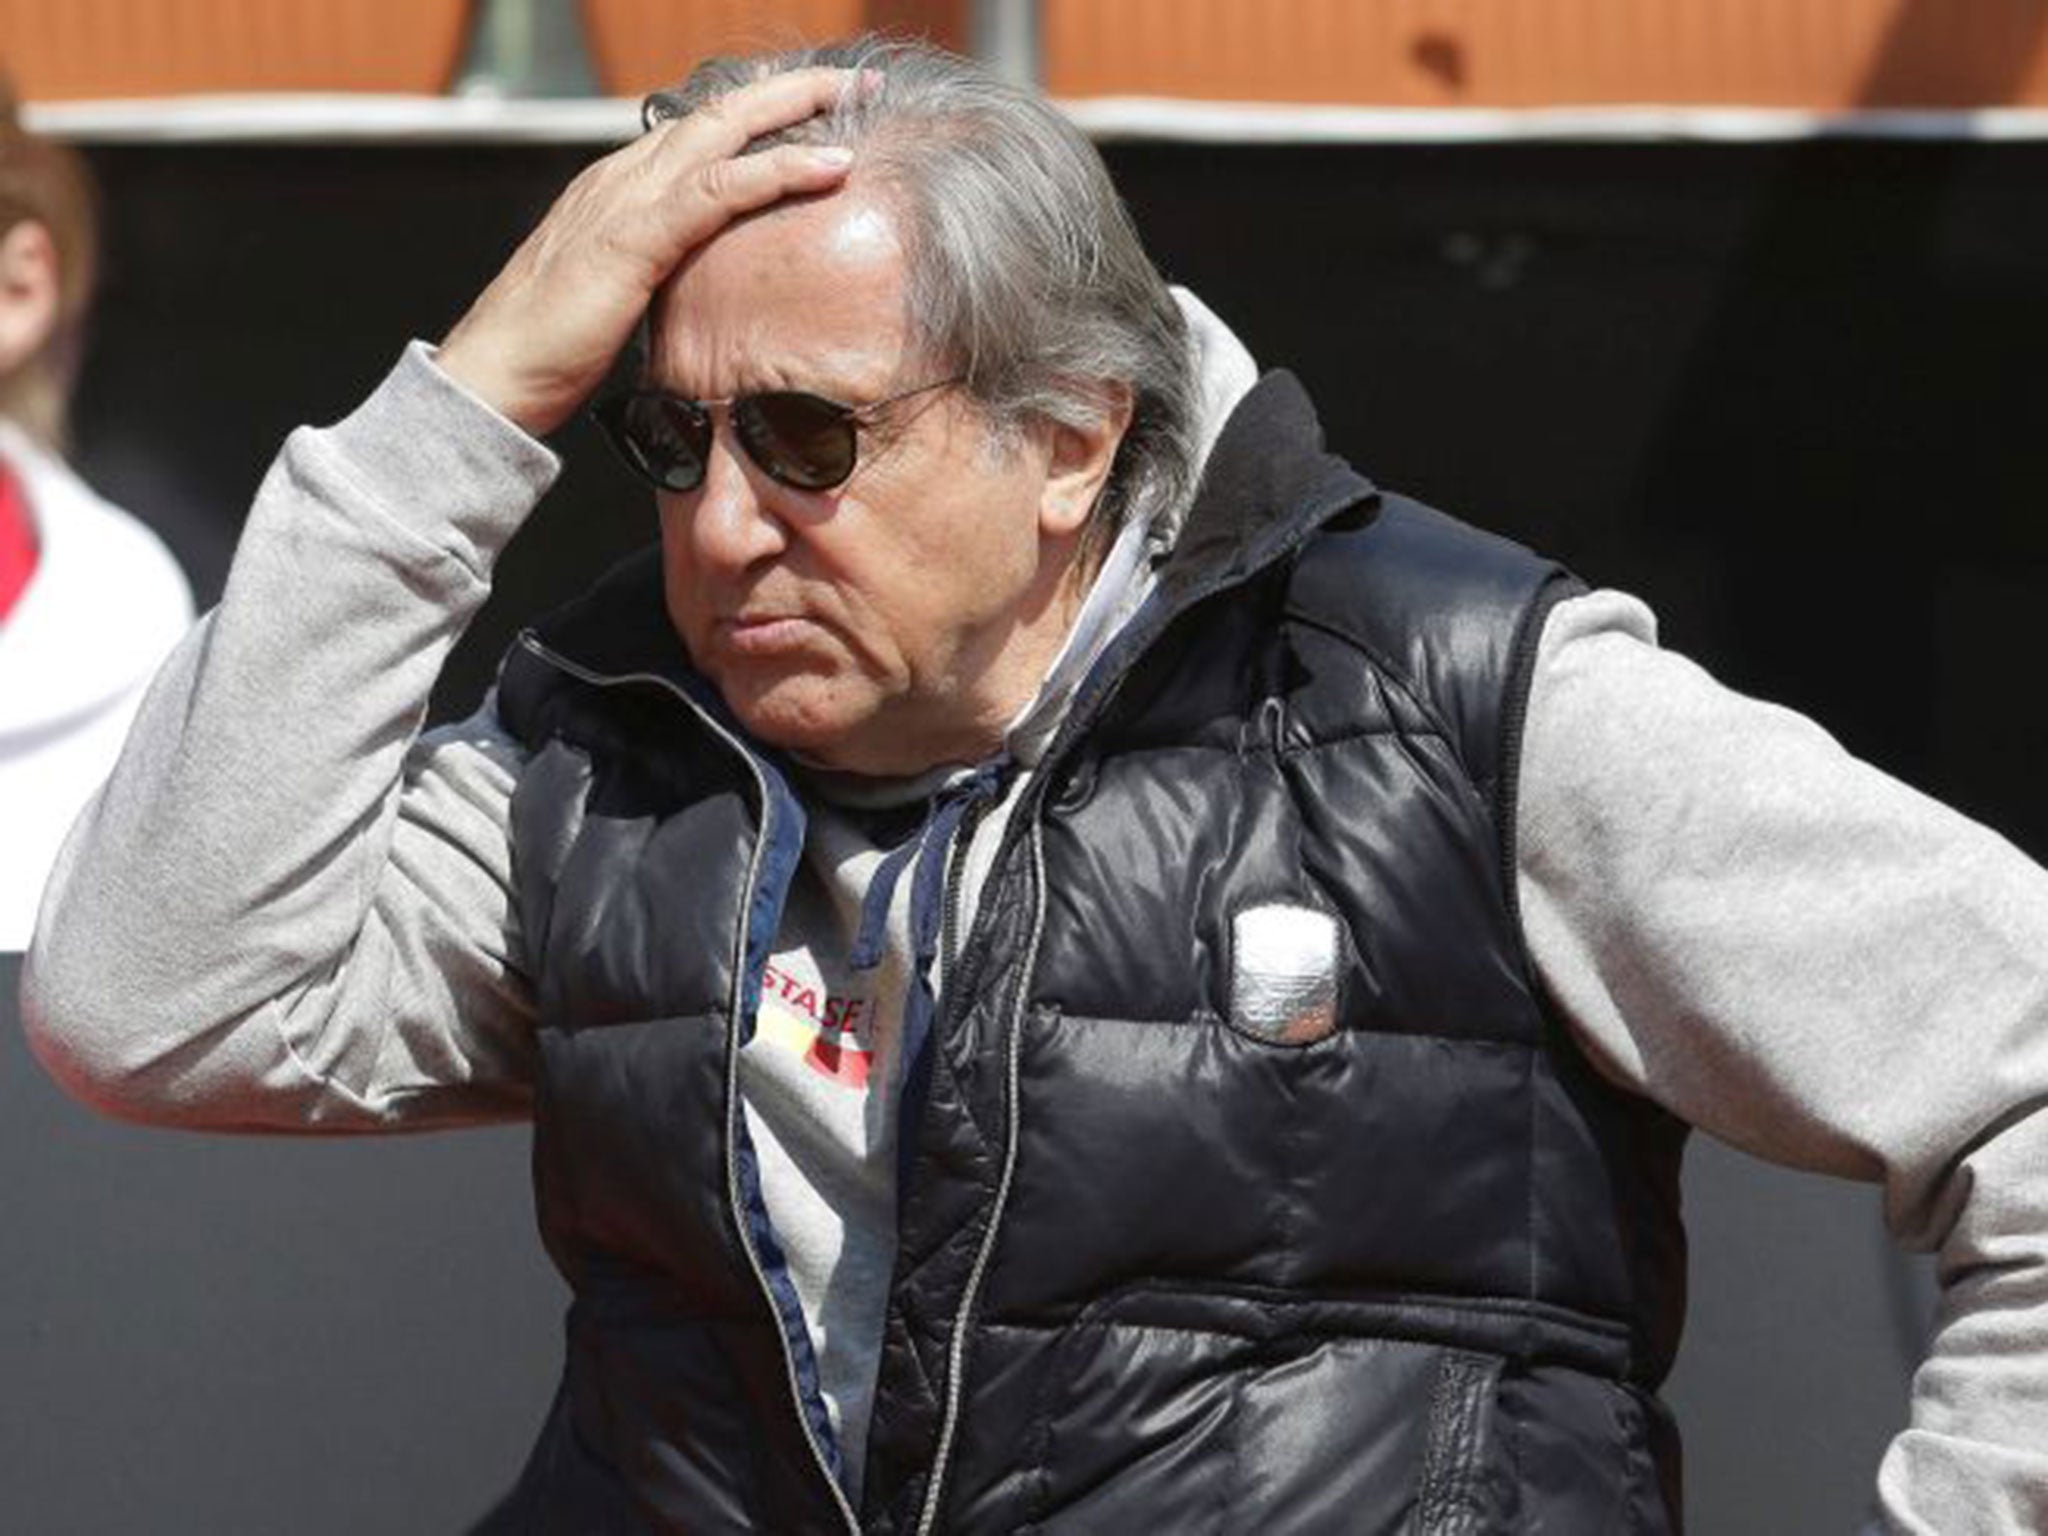 Nastase is likely to be hit with a length ban after his erratic behavior